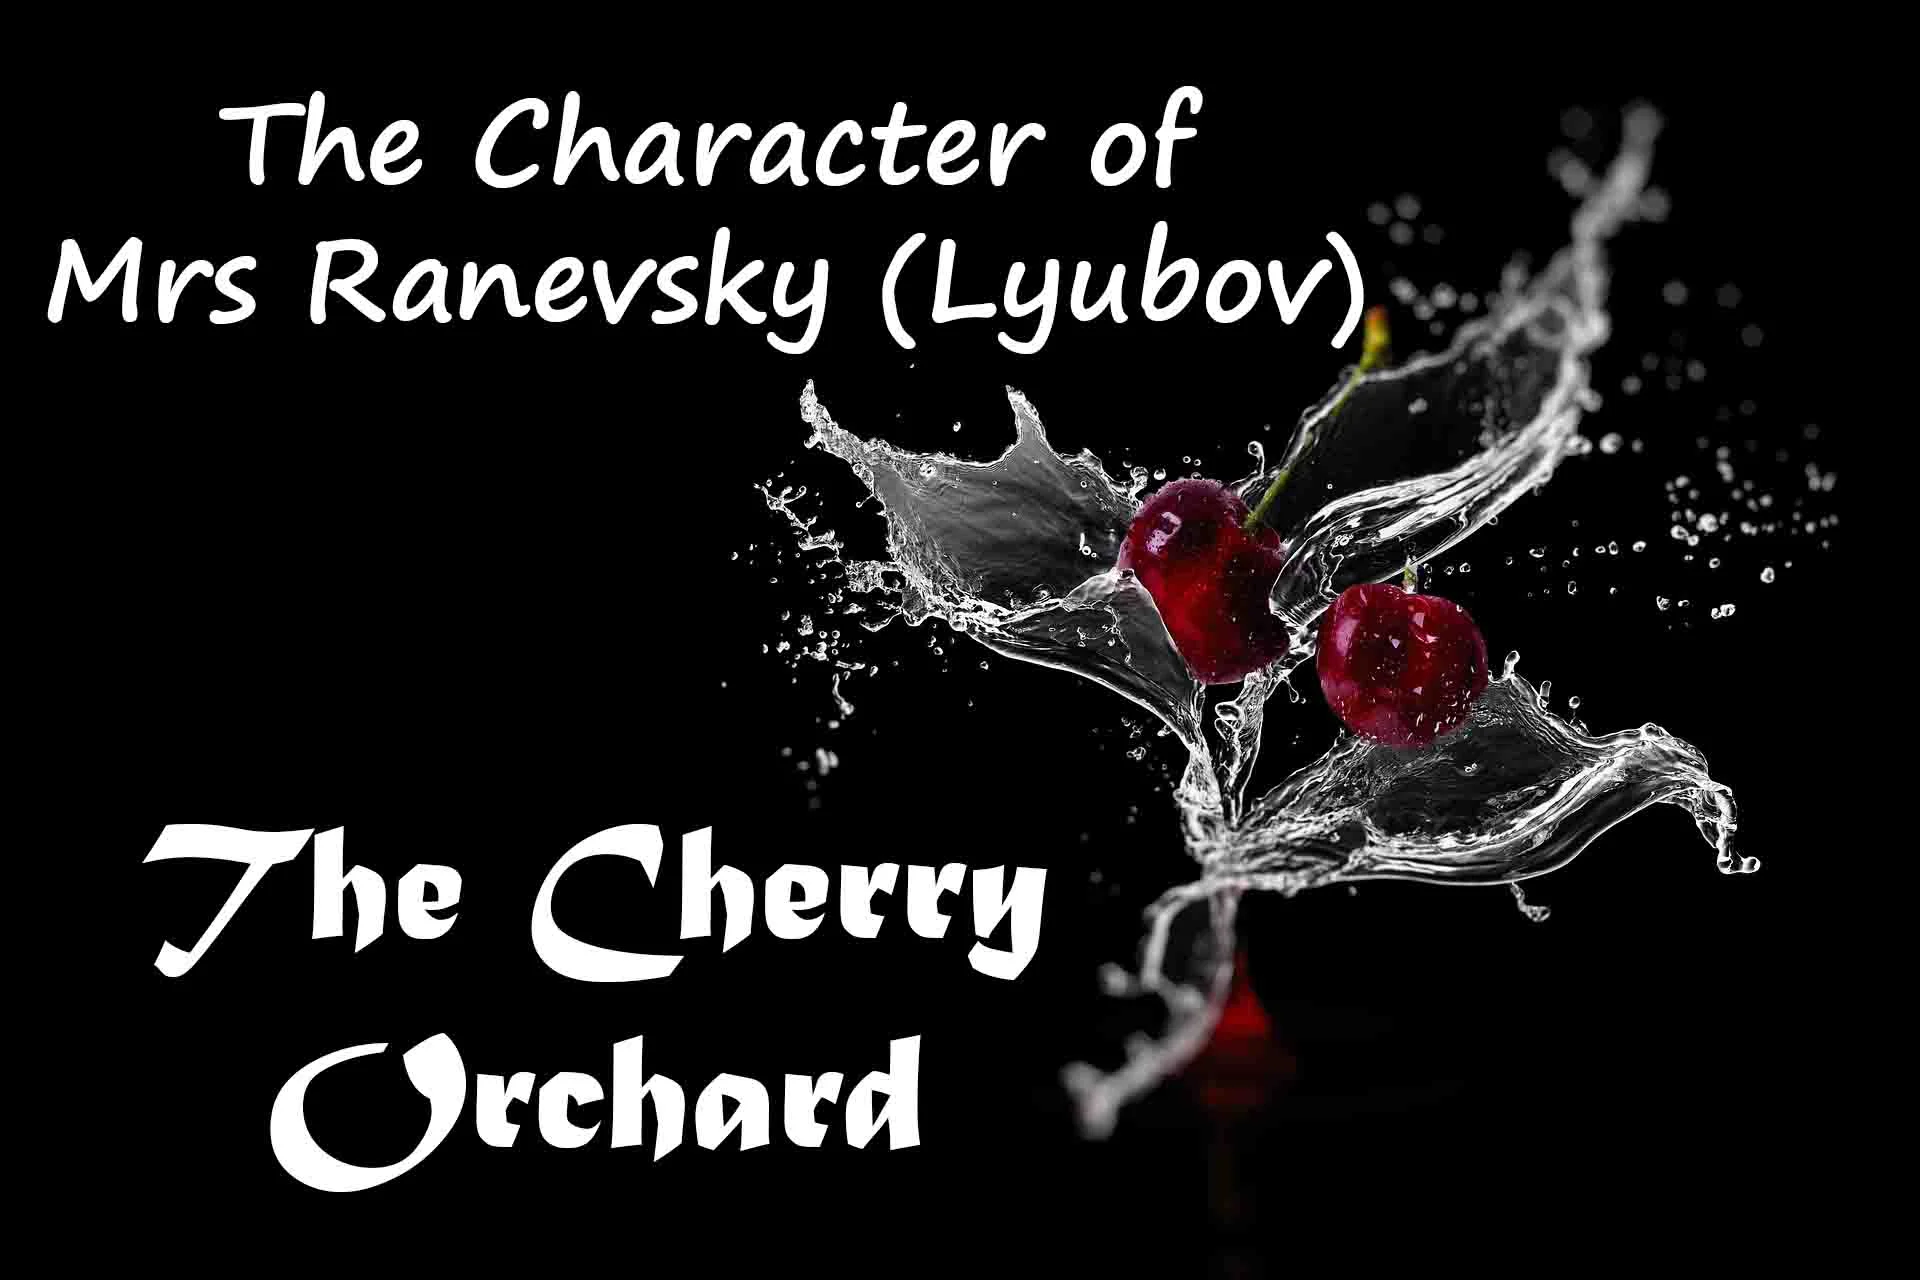 The Character of Mrs Ranevsky (Lyubov) in The Cherry Orchard